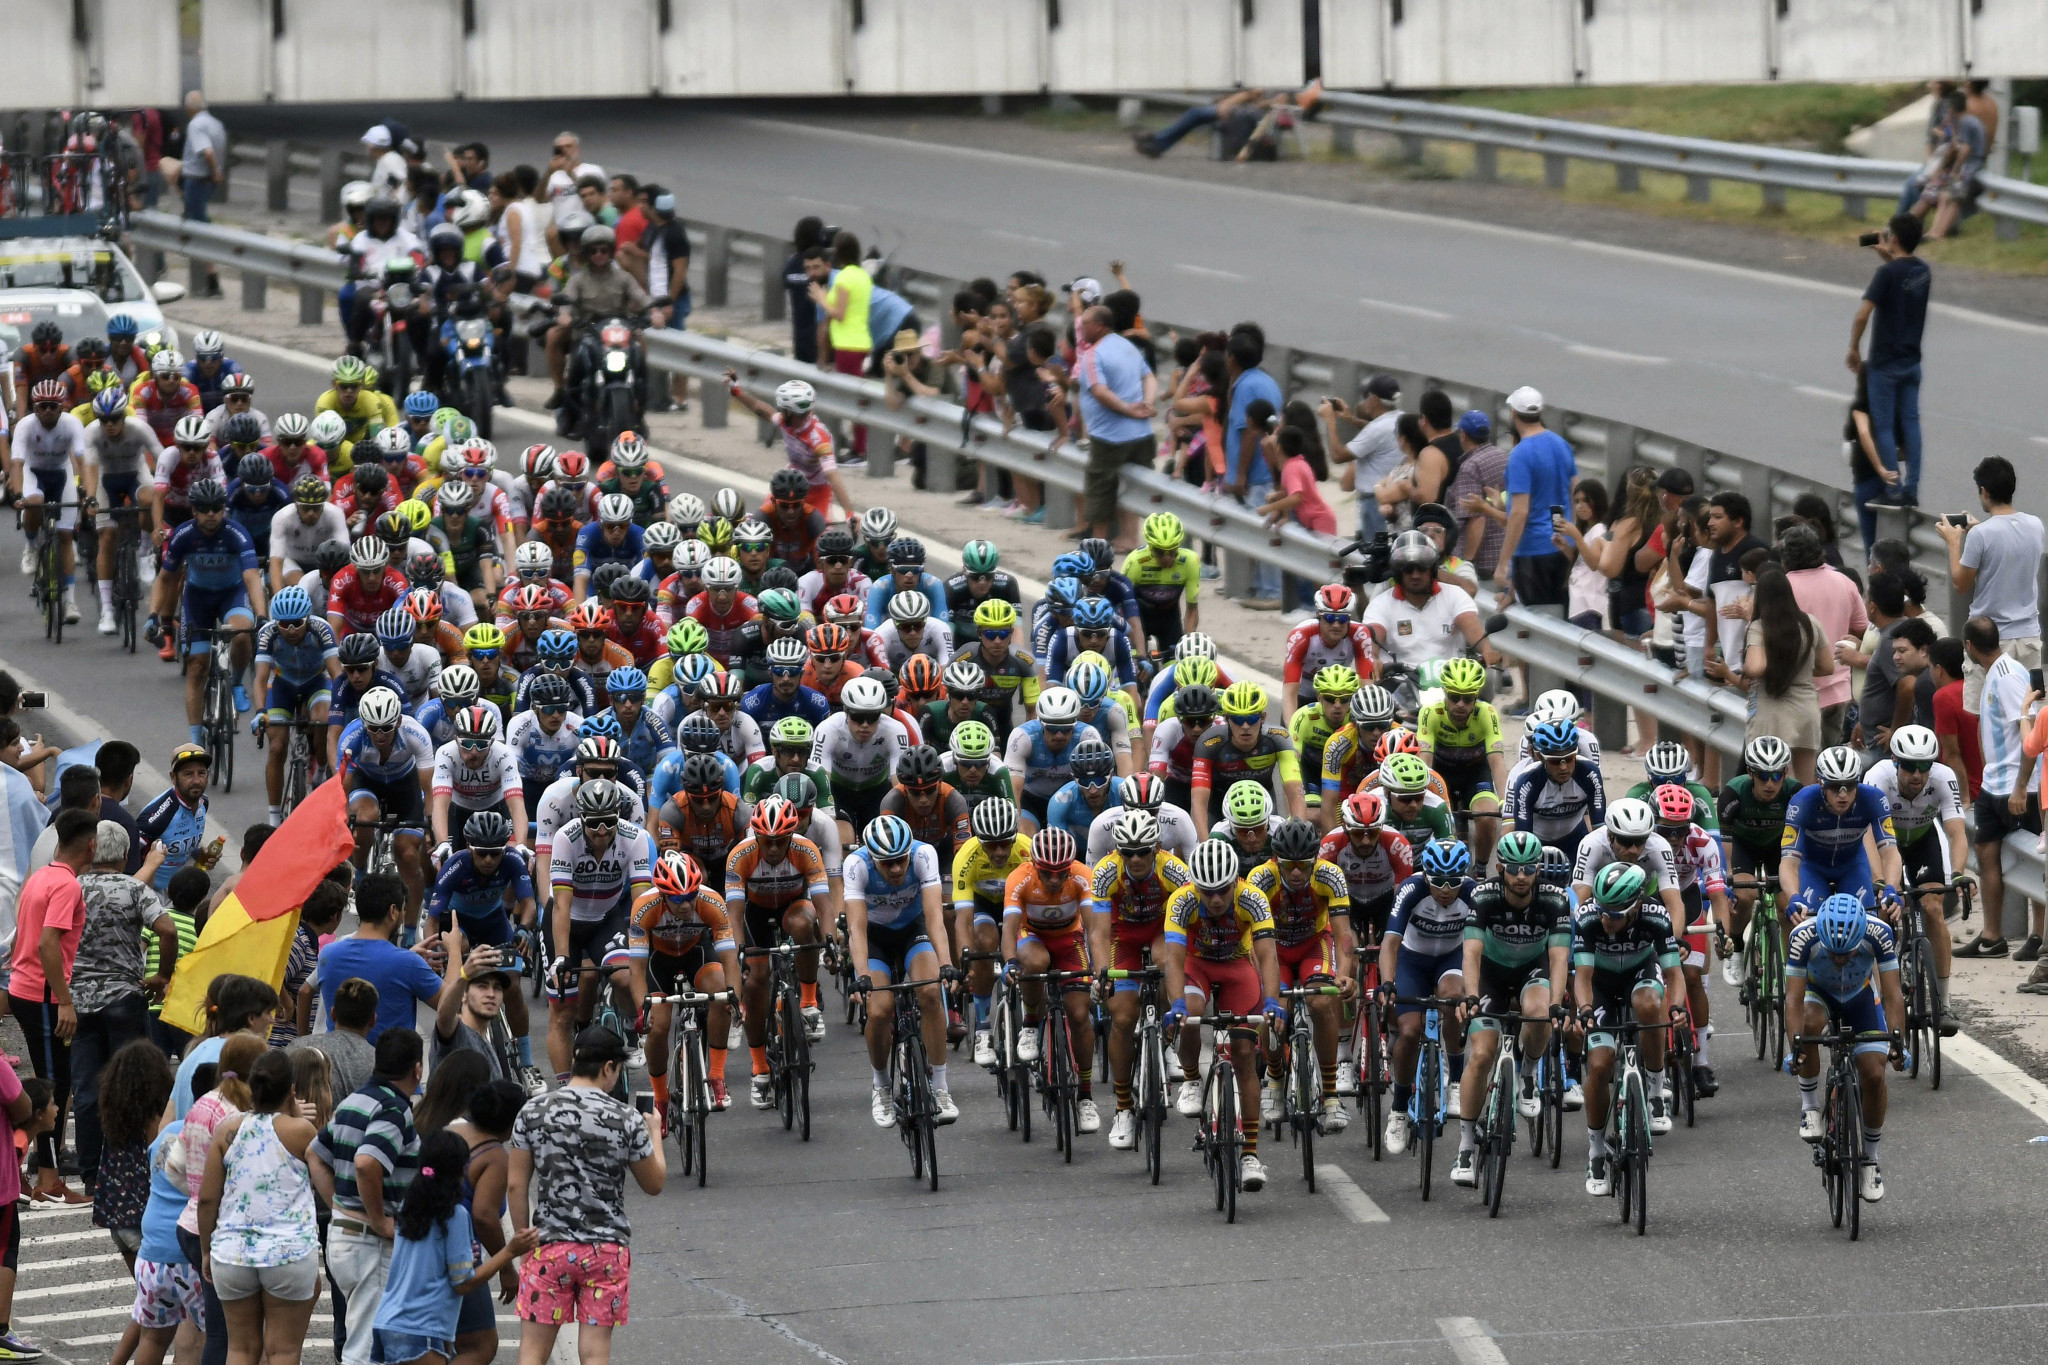 The Vuelta a San Juan has not been staged since January 2020 due to the coronavirus pandemic ©Getty Images